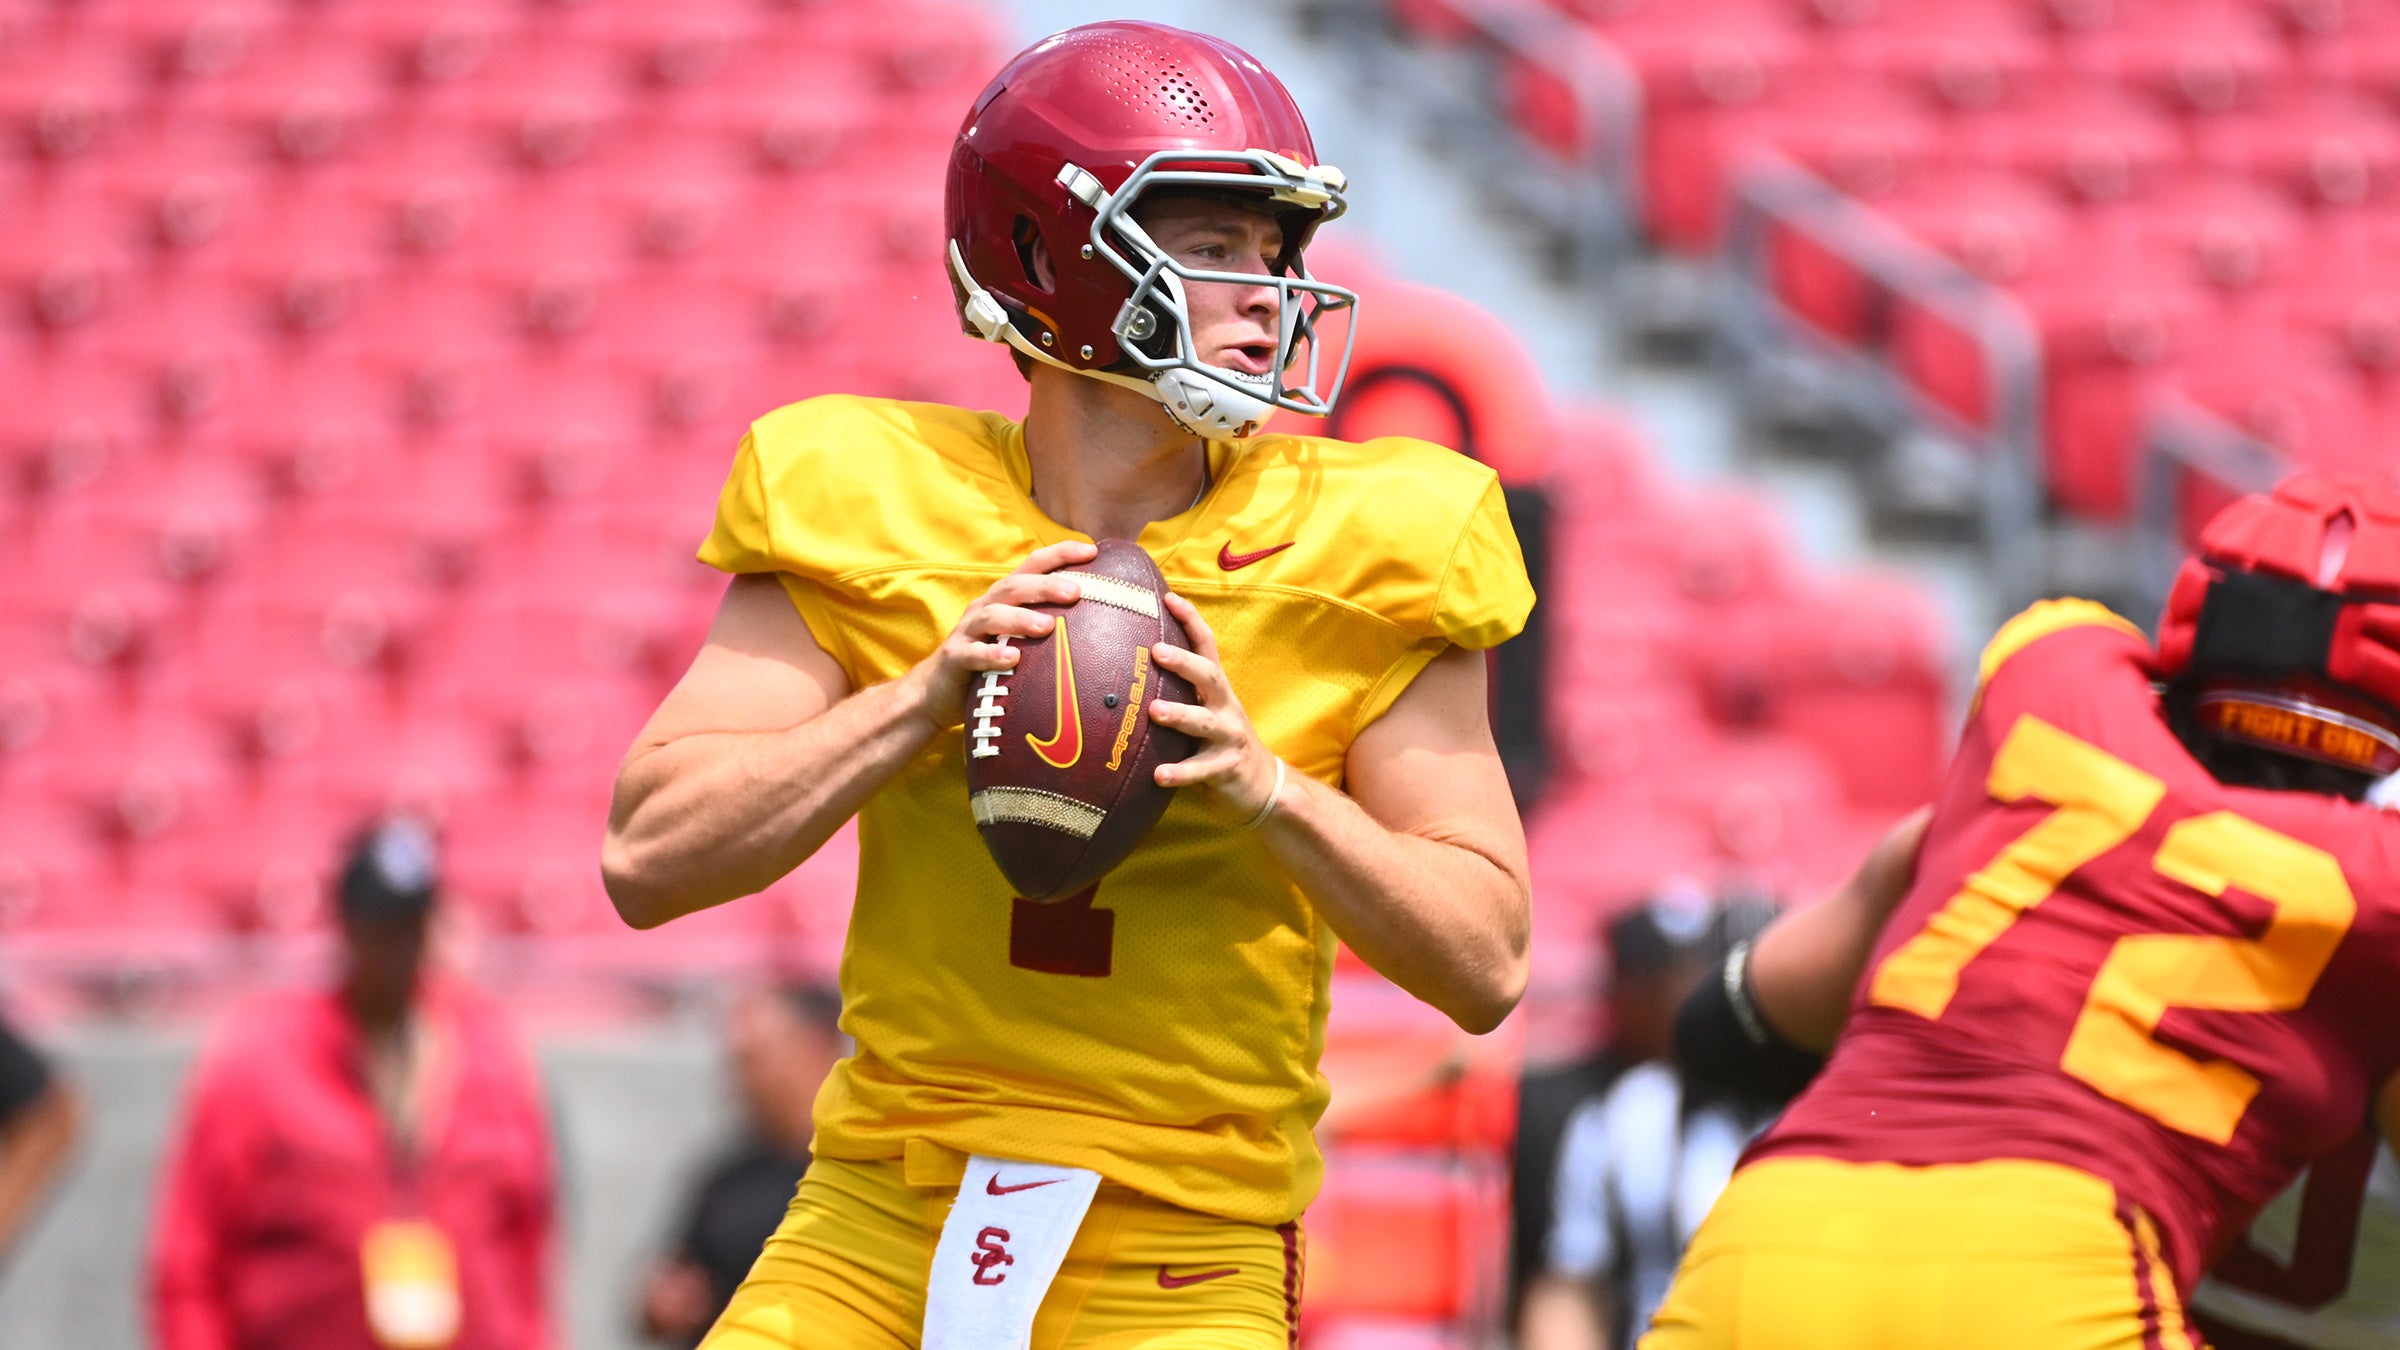 USC fans get first look at Big Ten Trojans during spring football game